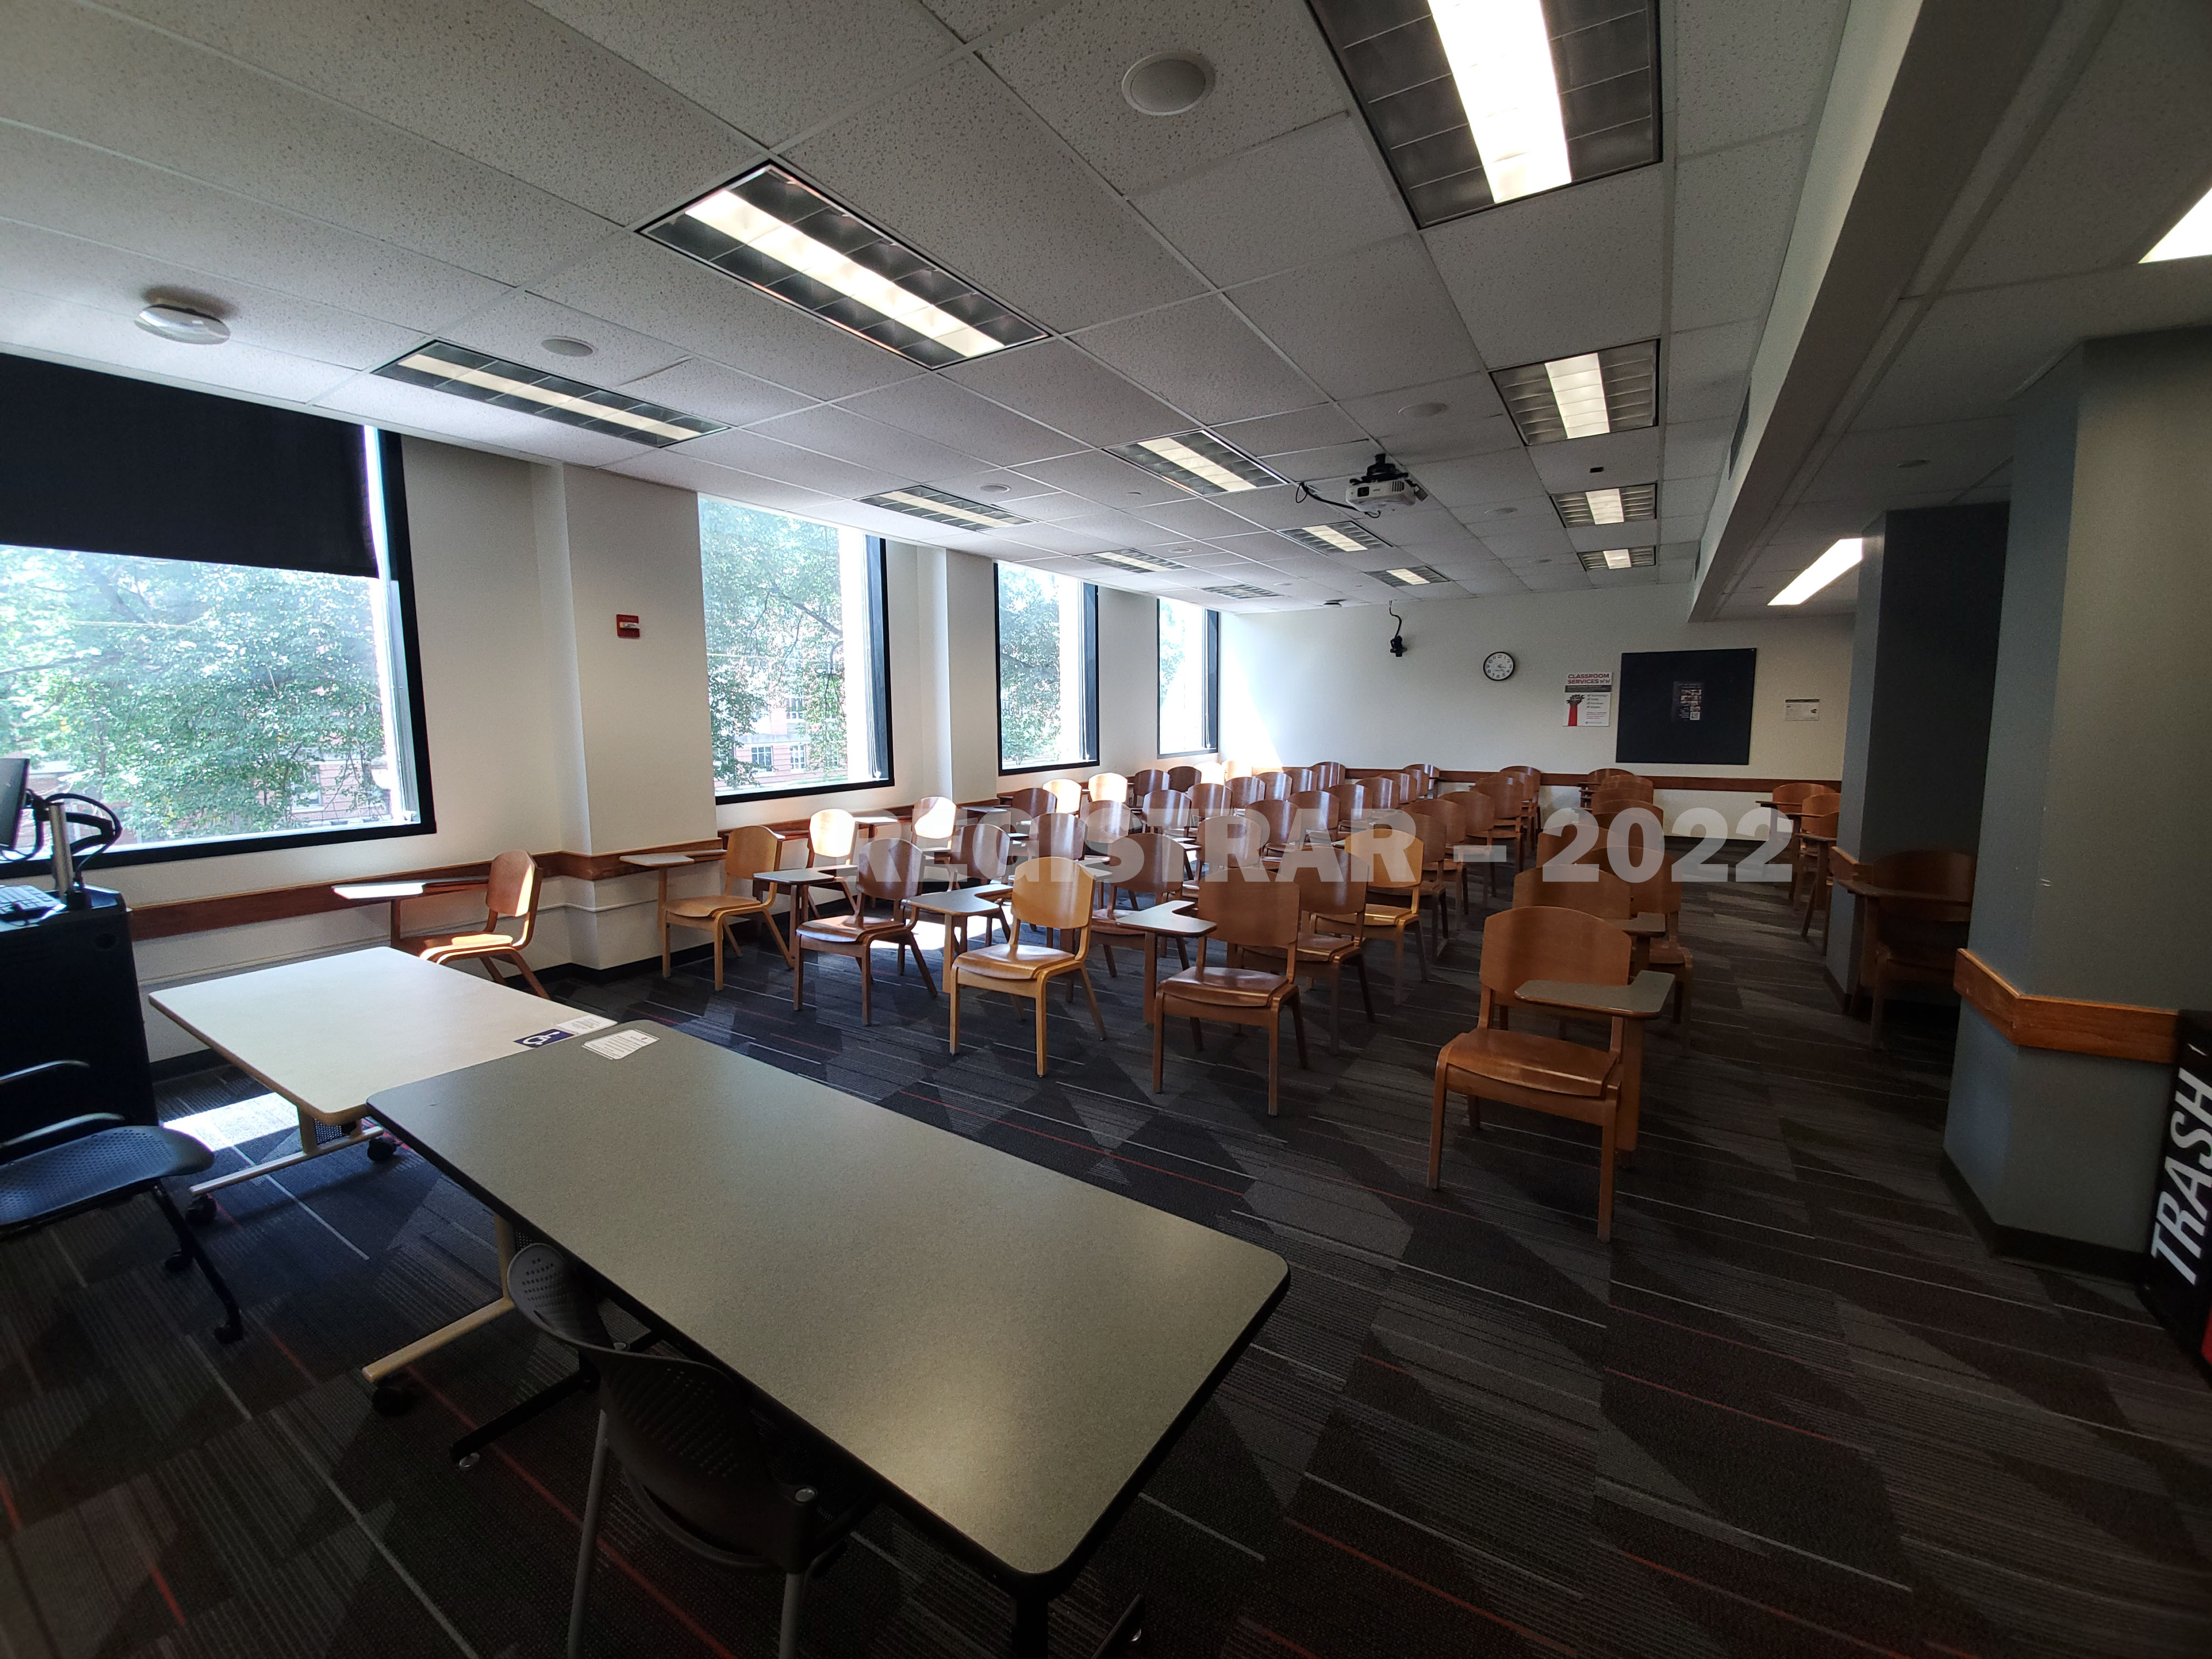 McPherson Chemical Lab room 2019 ultra wide angle view from the front of the room